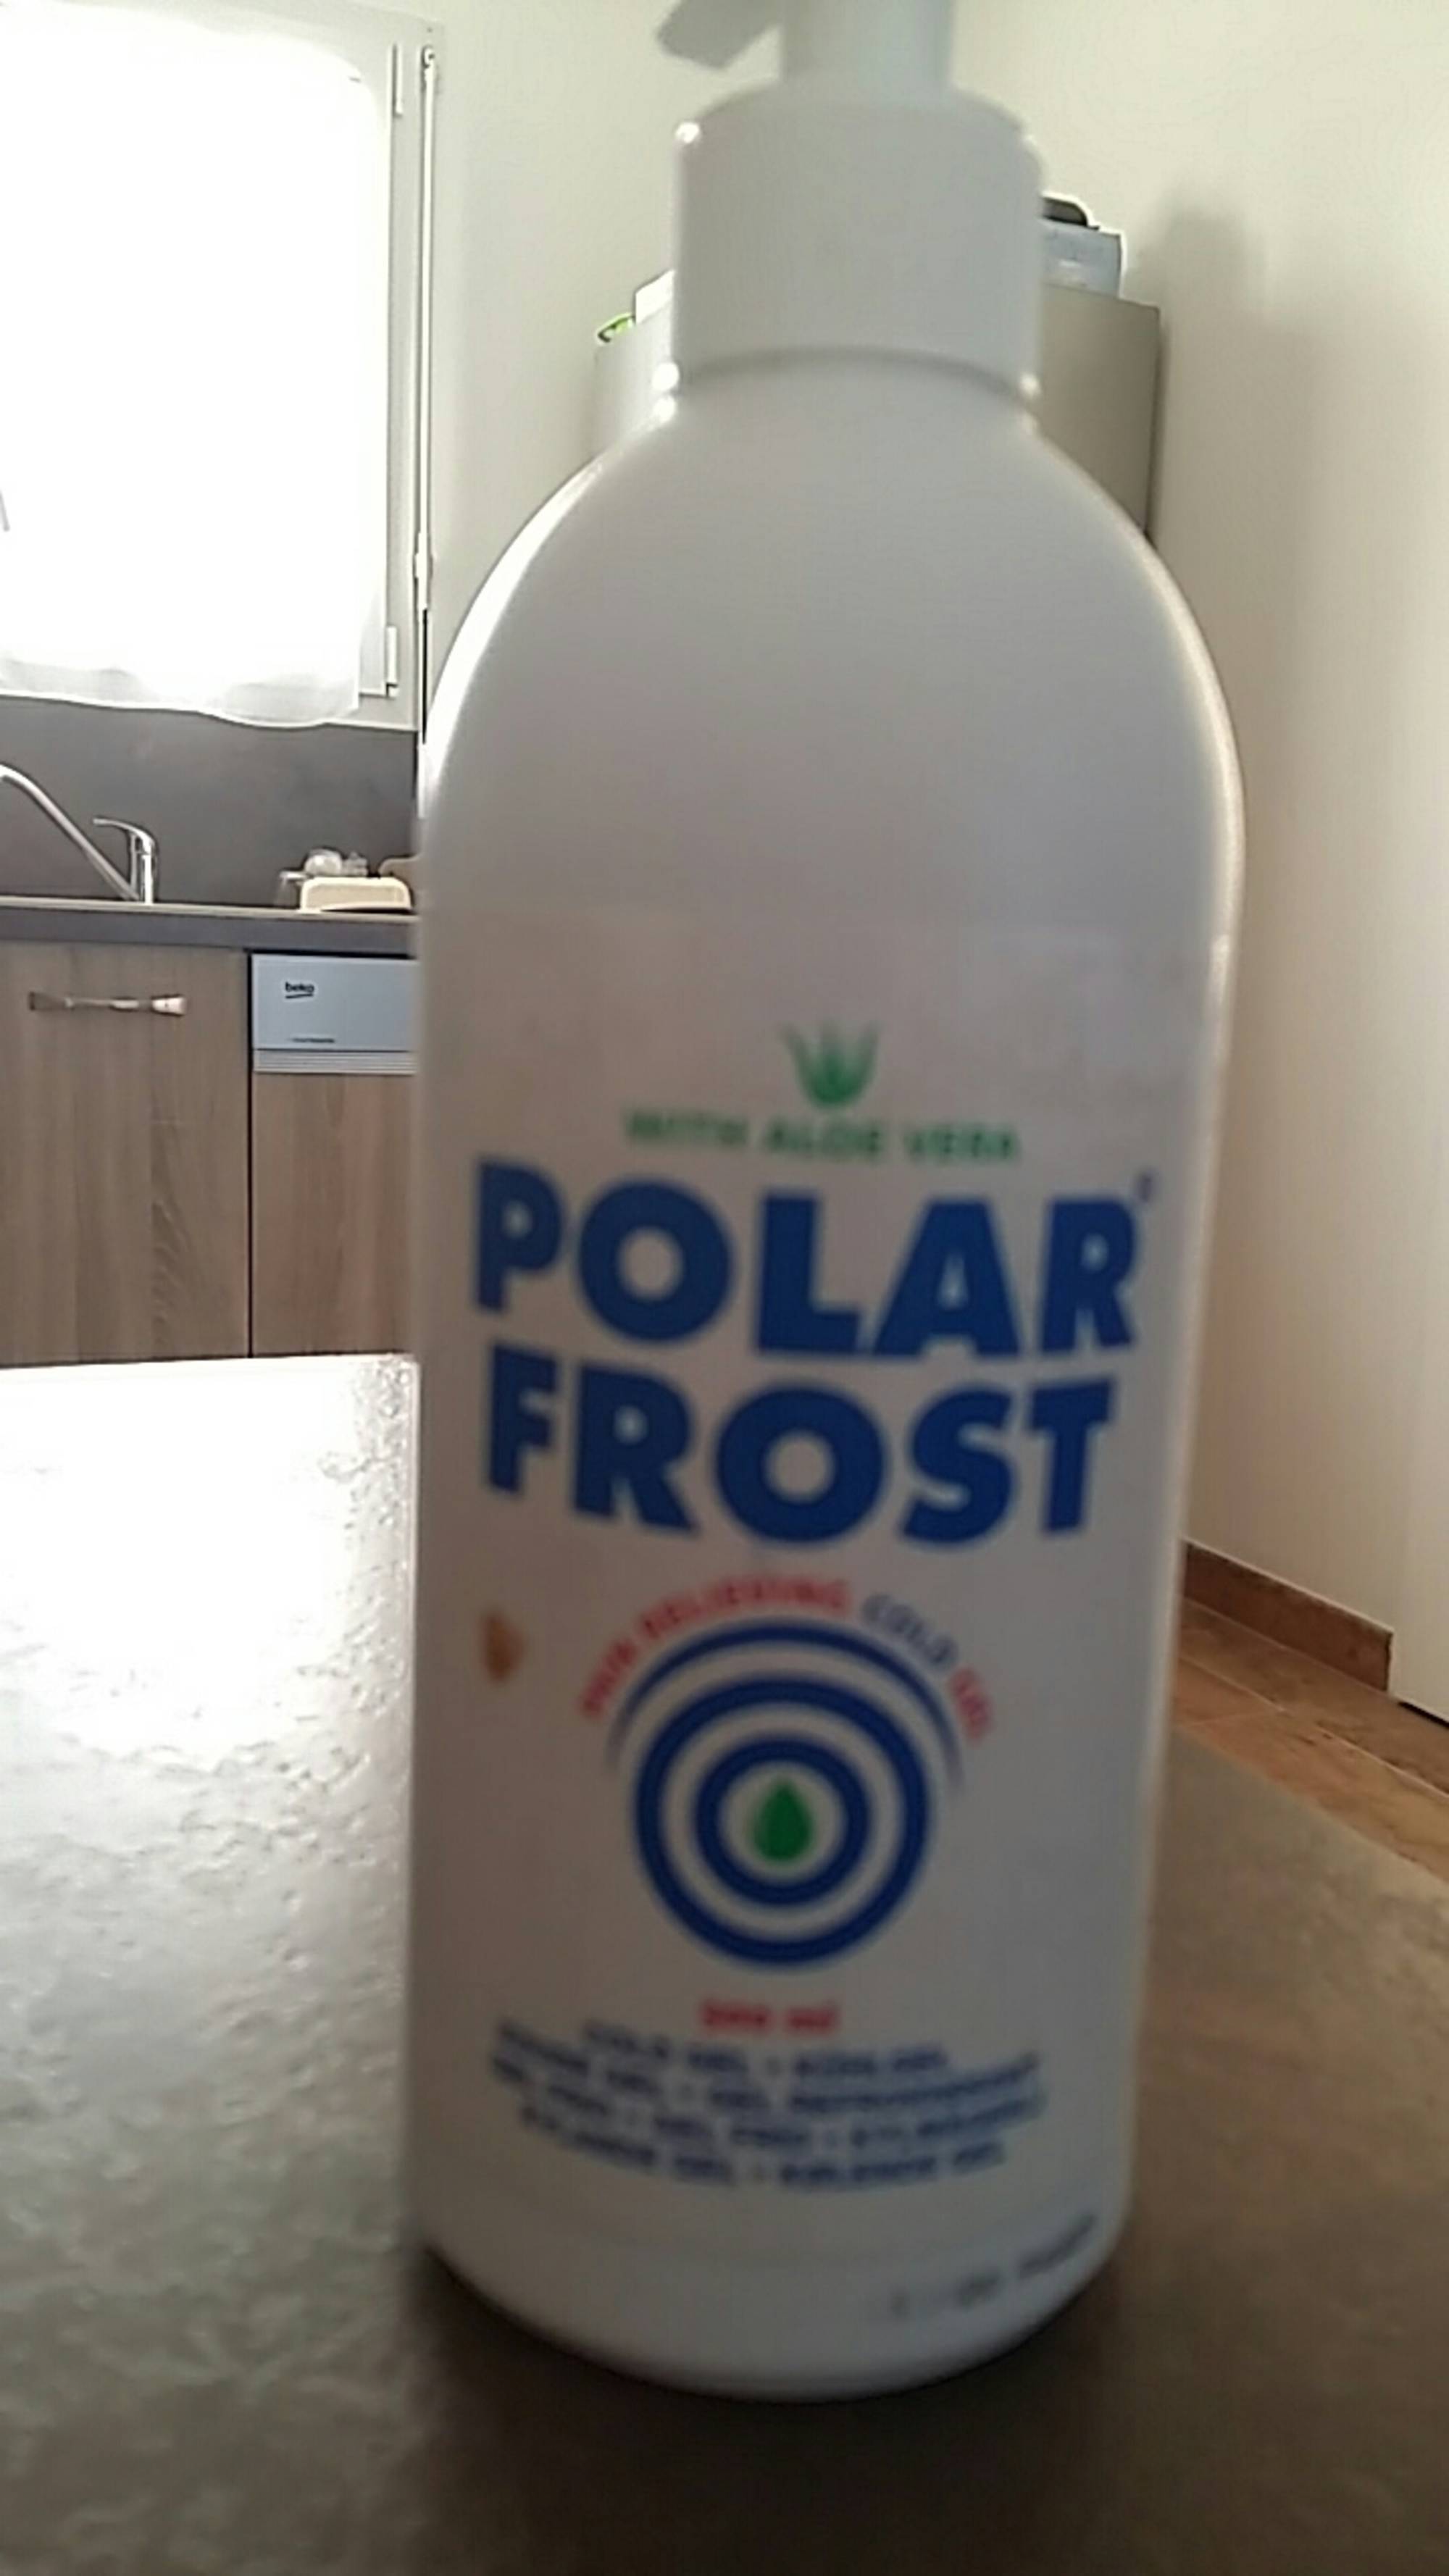 POLAR FROST - Pain relieving cold gel